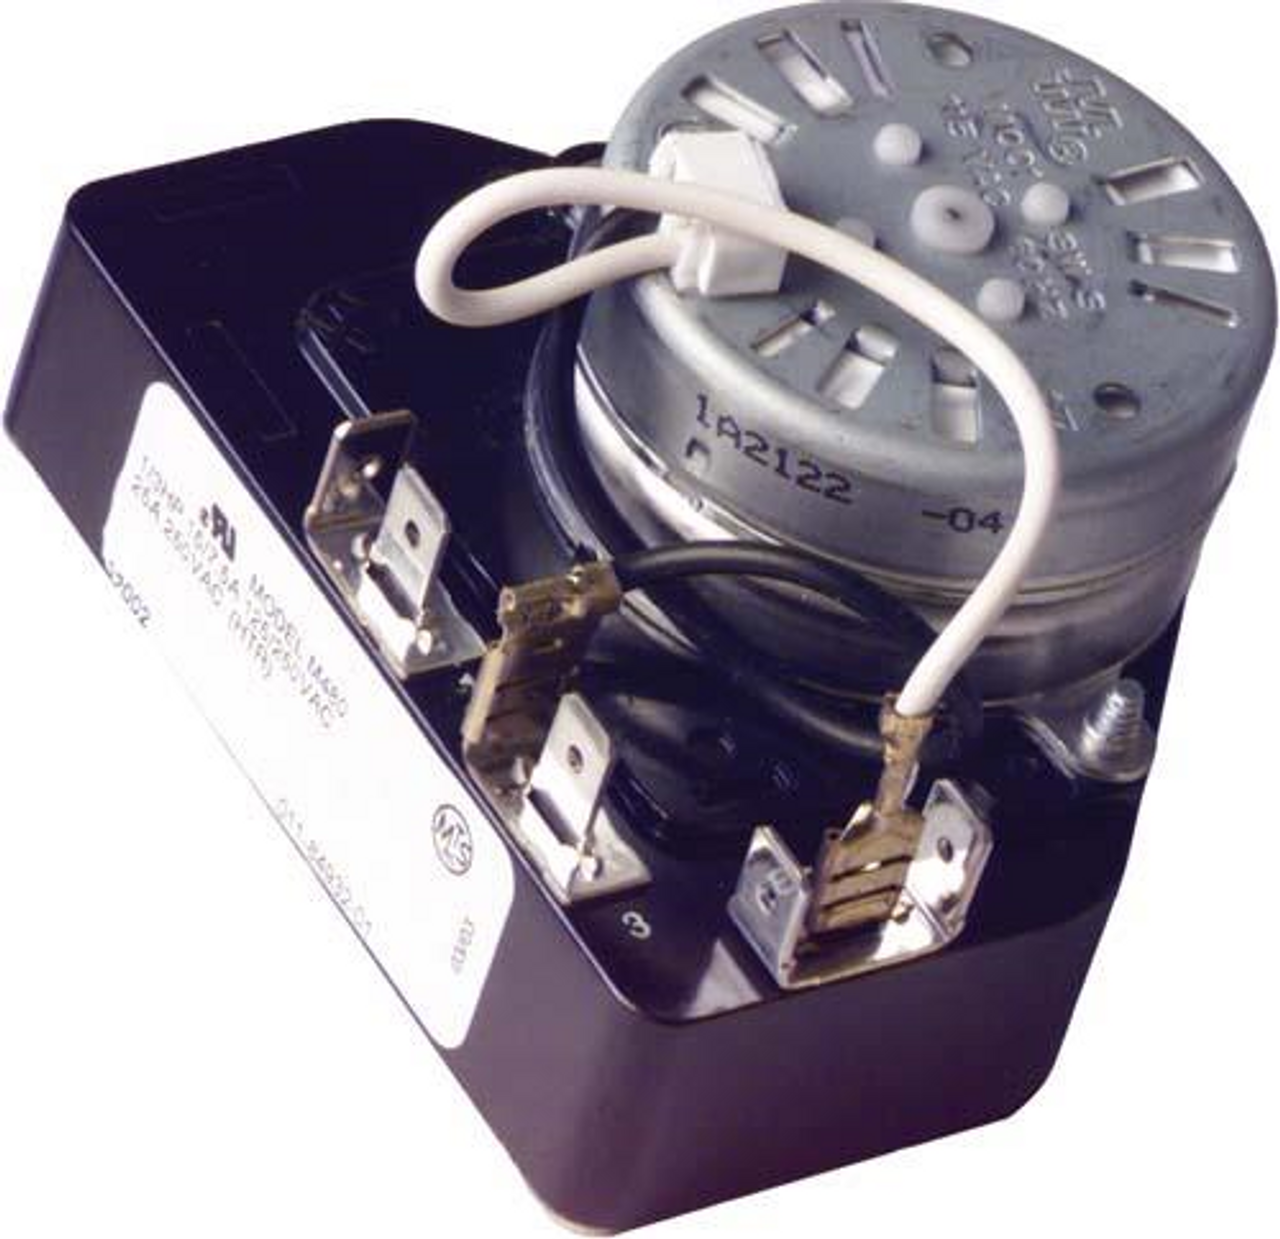 12-Hour Clockwise Timer (For Lester Chargers), 1211, 1012000